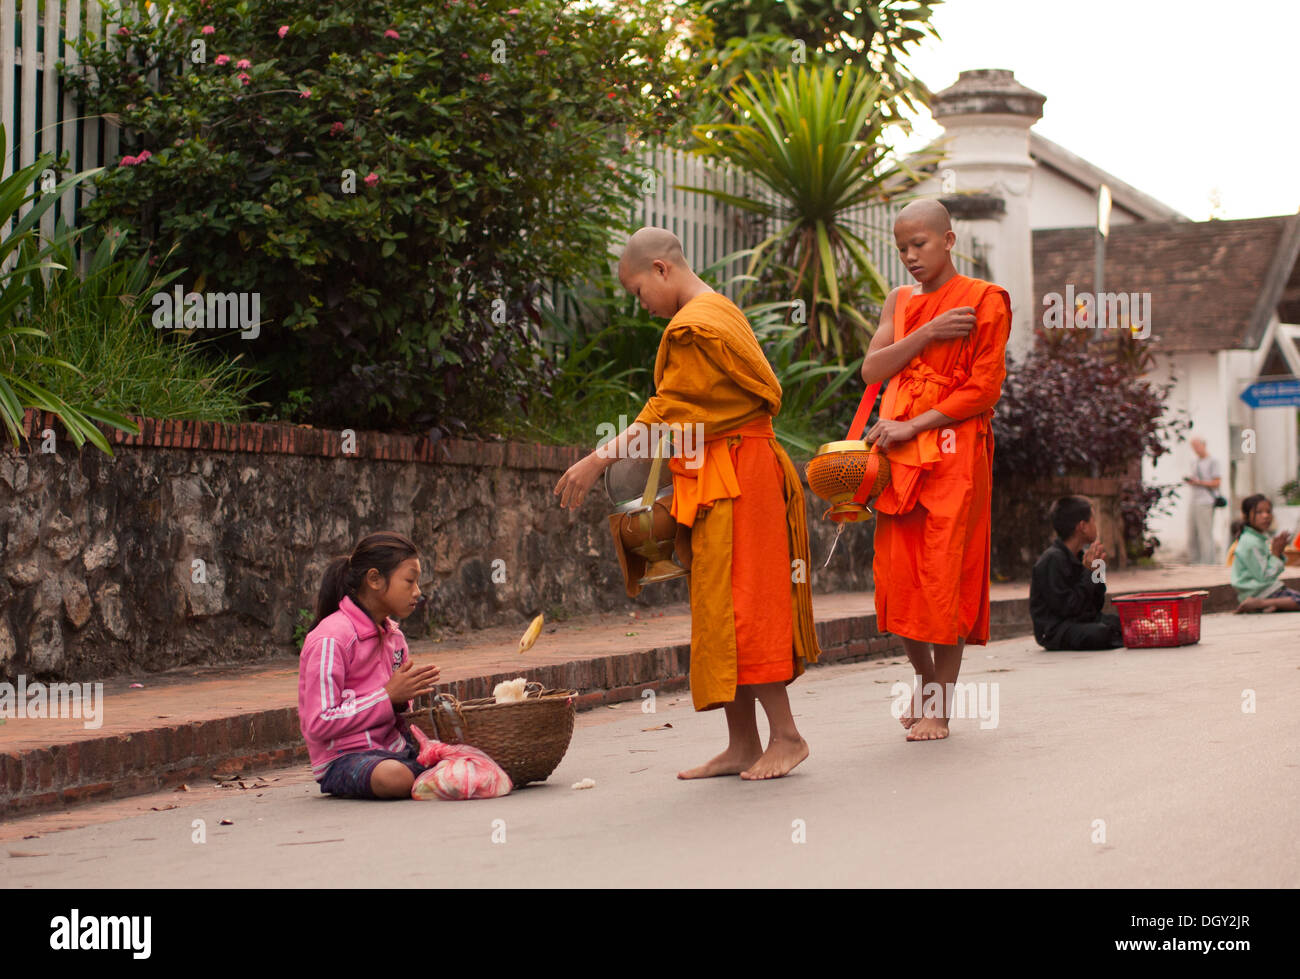 A Buddhist monk gives a poor girl food during the daily morning ceremony of giving alms to monks in Luang Prabang, Laos. Stock Photo